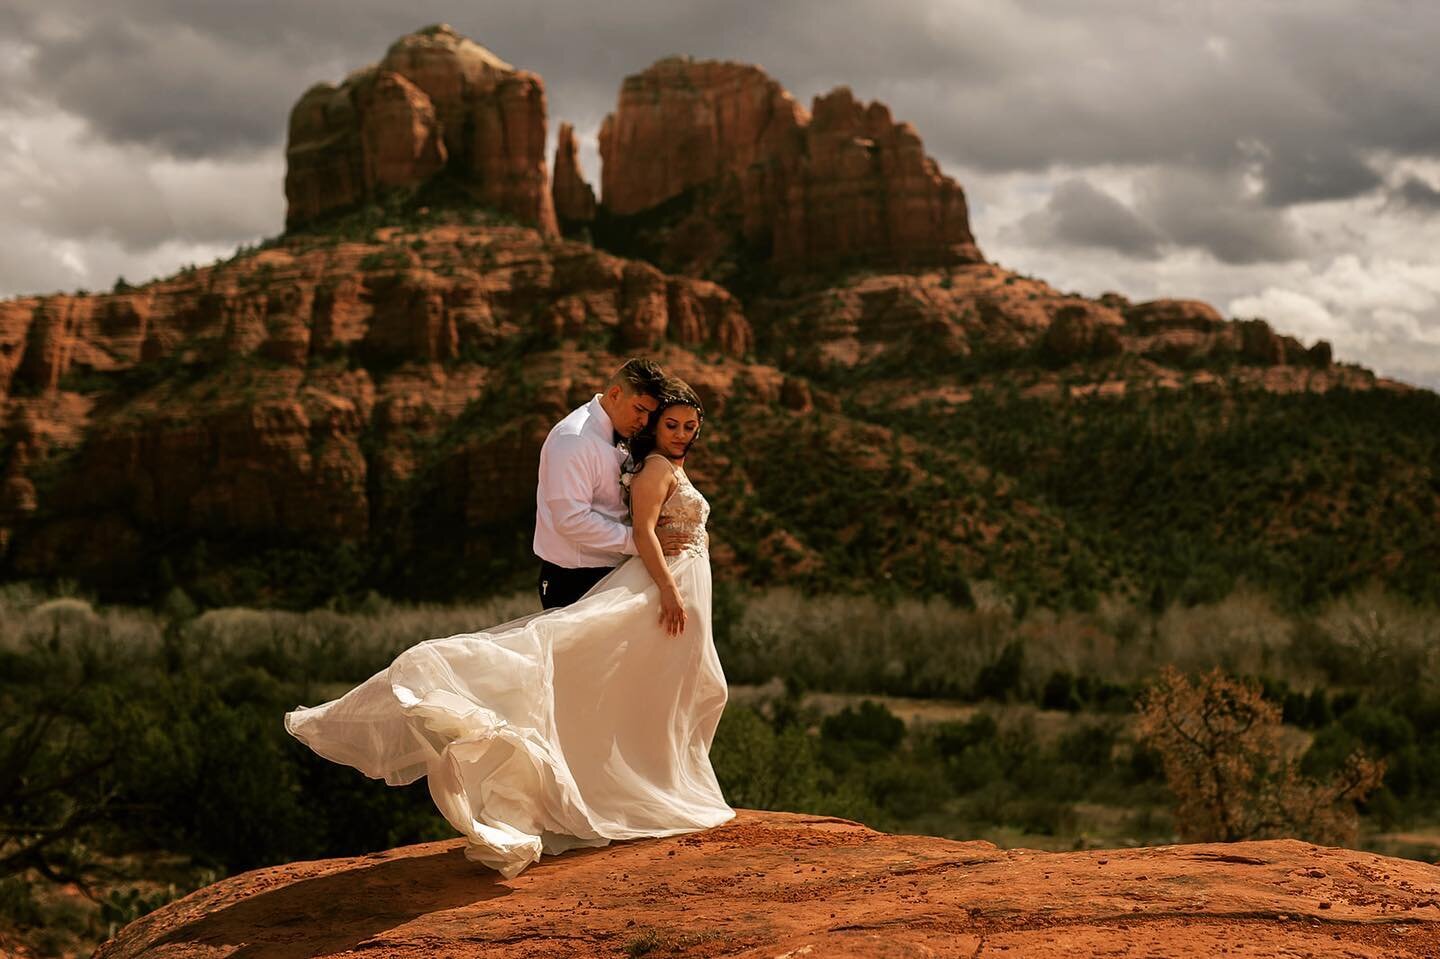 One of my all-time favorite photos from @bonmillerphoto - combining the moodiness of the sky with the liveliness of the wind😍 #earthelopements #sedonaelopement #sedonawedding #windywedding #backtoearth #naturelovers #outdoorwedding #wildwedding #sed